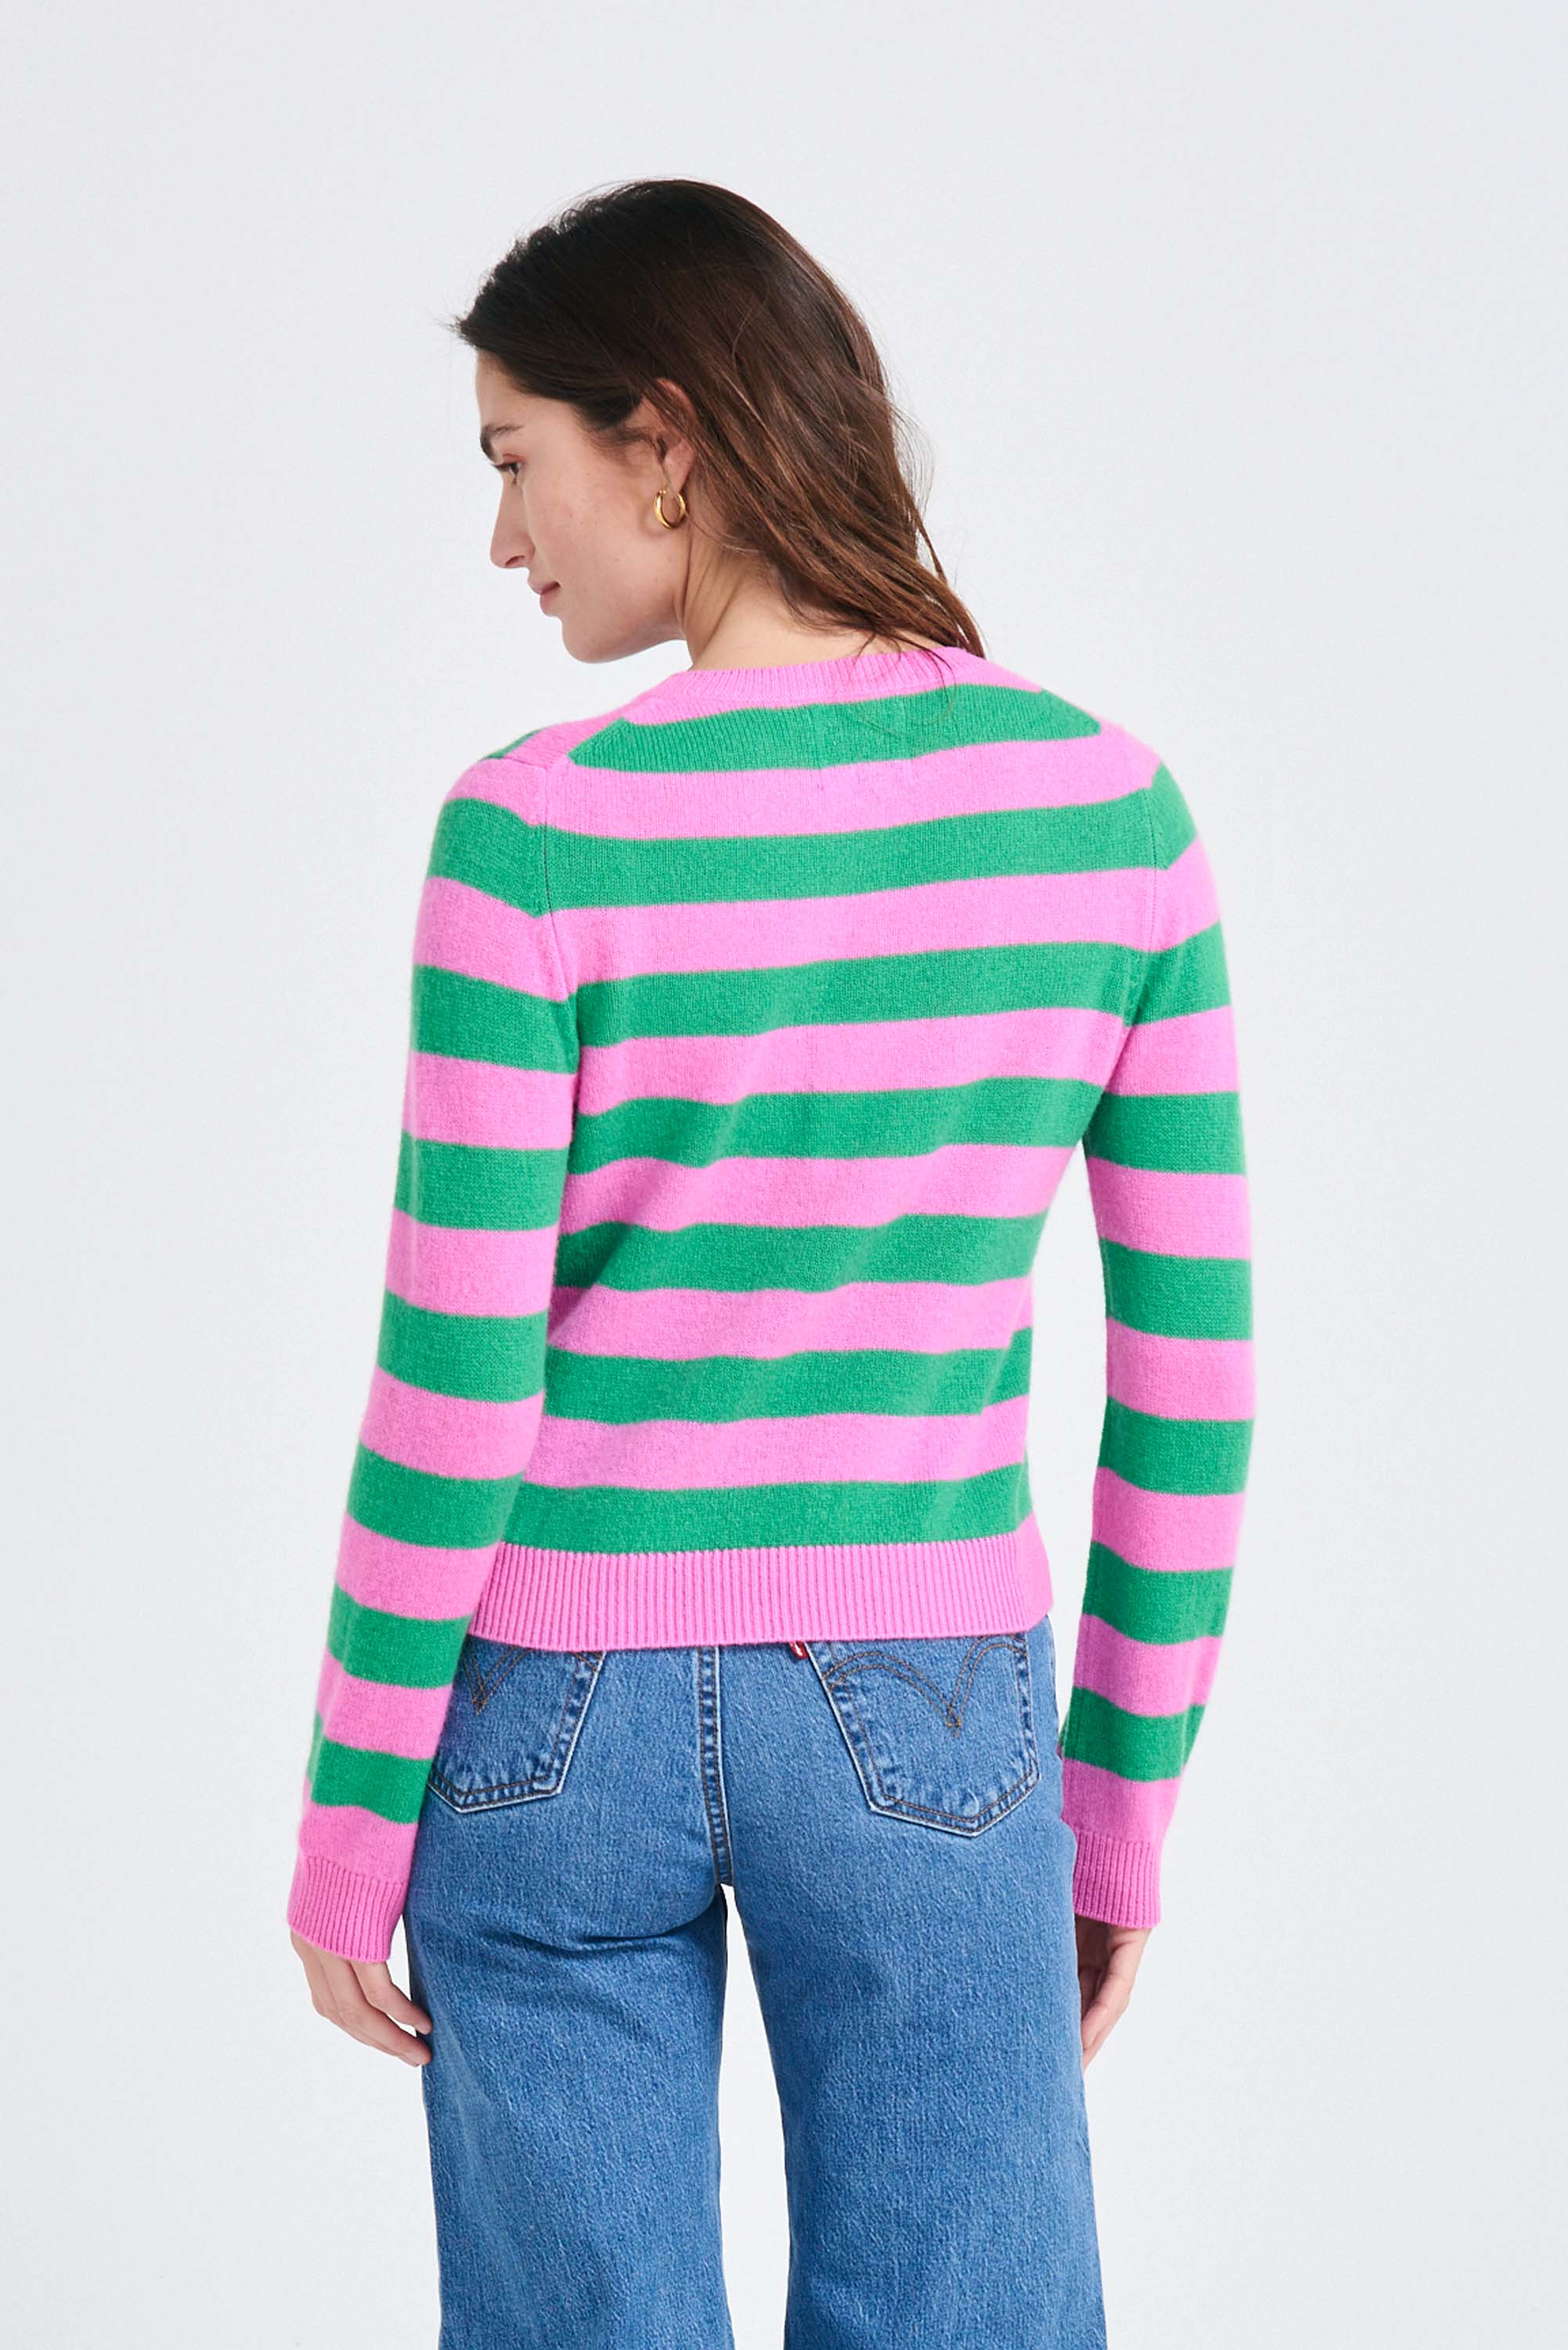 Brown haired female model wearing Jumper1234 Stripe cashmere crew neck jumper in peony and bright green facing away from the camera